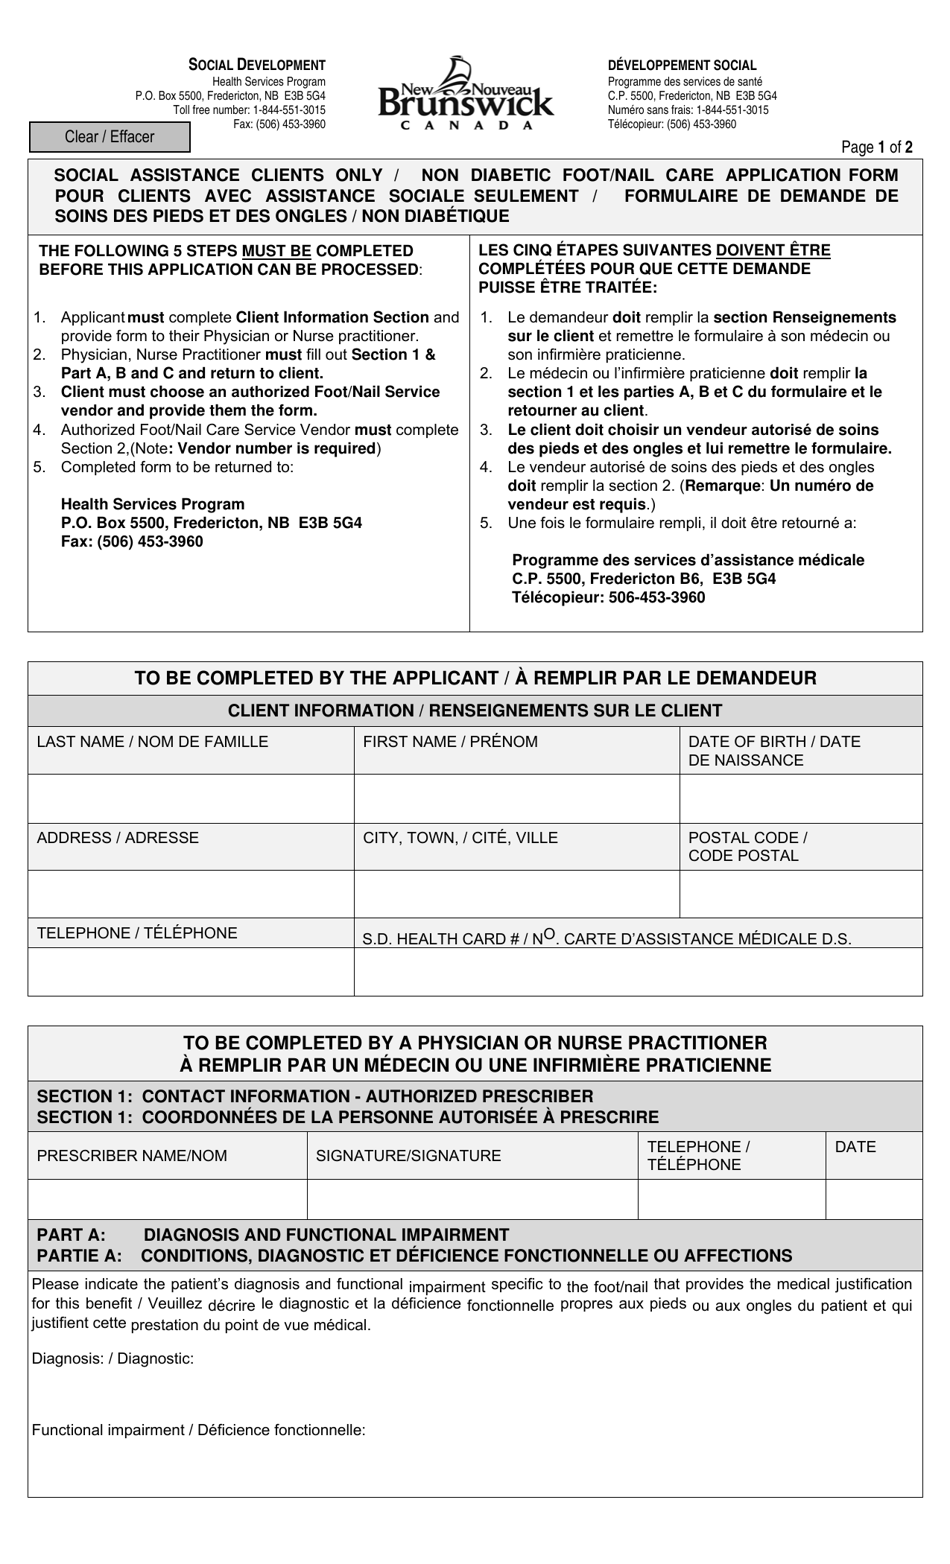 Non Diabetic Foot / Nail Care Application Form - New Brunswick, Canada (English / French), Page 1